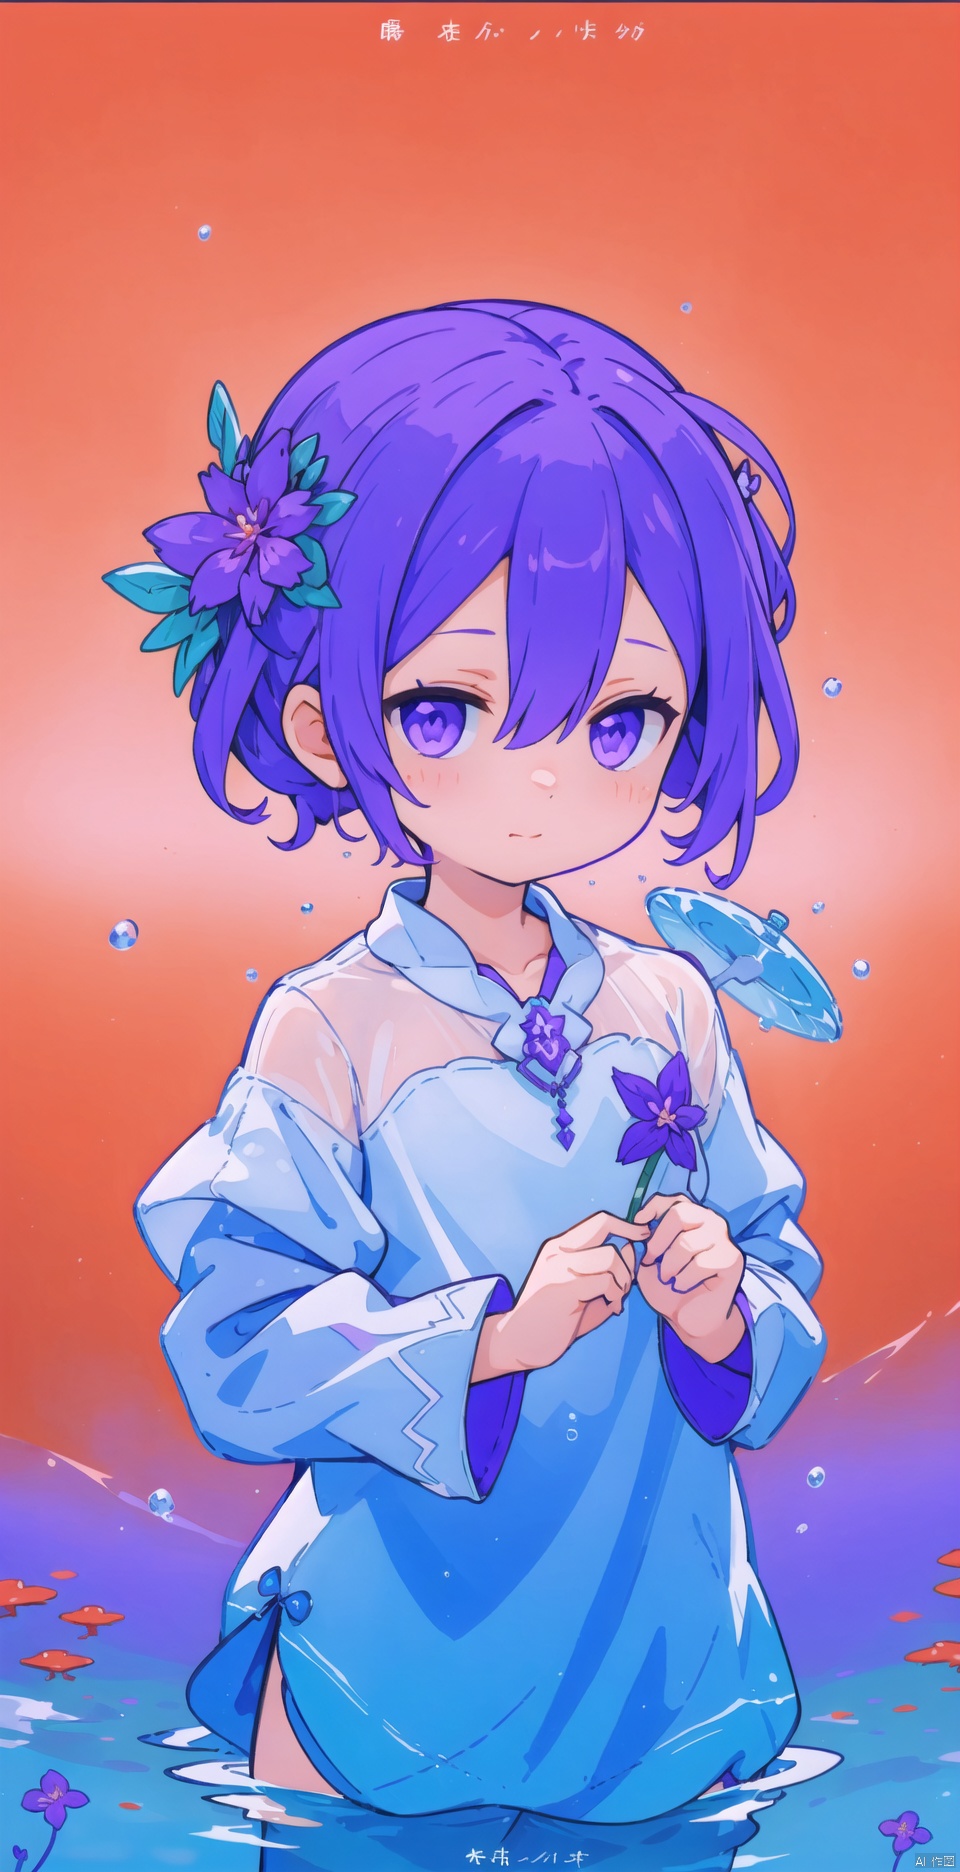  1 girl,(Purple light effect),hair ornament,jewelry,looking at viewer,flower,floating hair,water,underwater,air bubble,submerged

, forehead mark, shota, red background